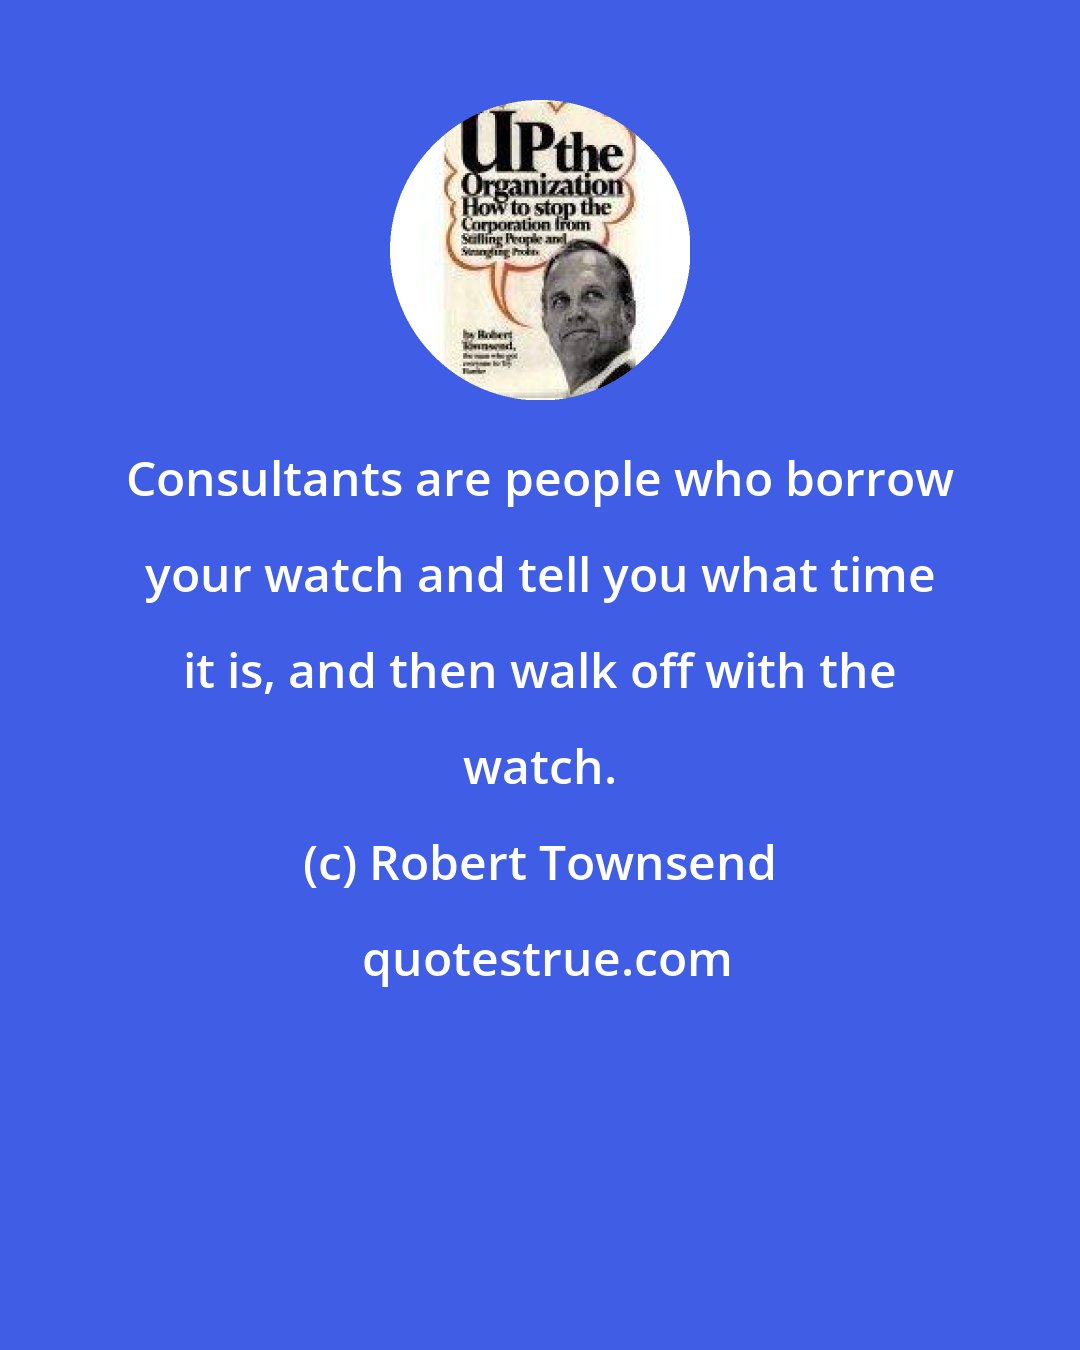 Robert Townsend: Consultants are people who borrow your watch and tell you what time it is, and then walk off with the watch.